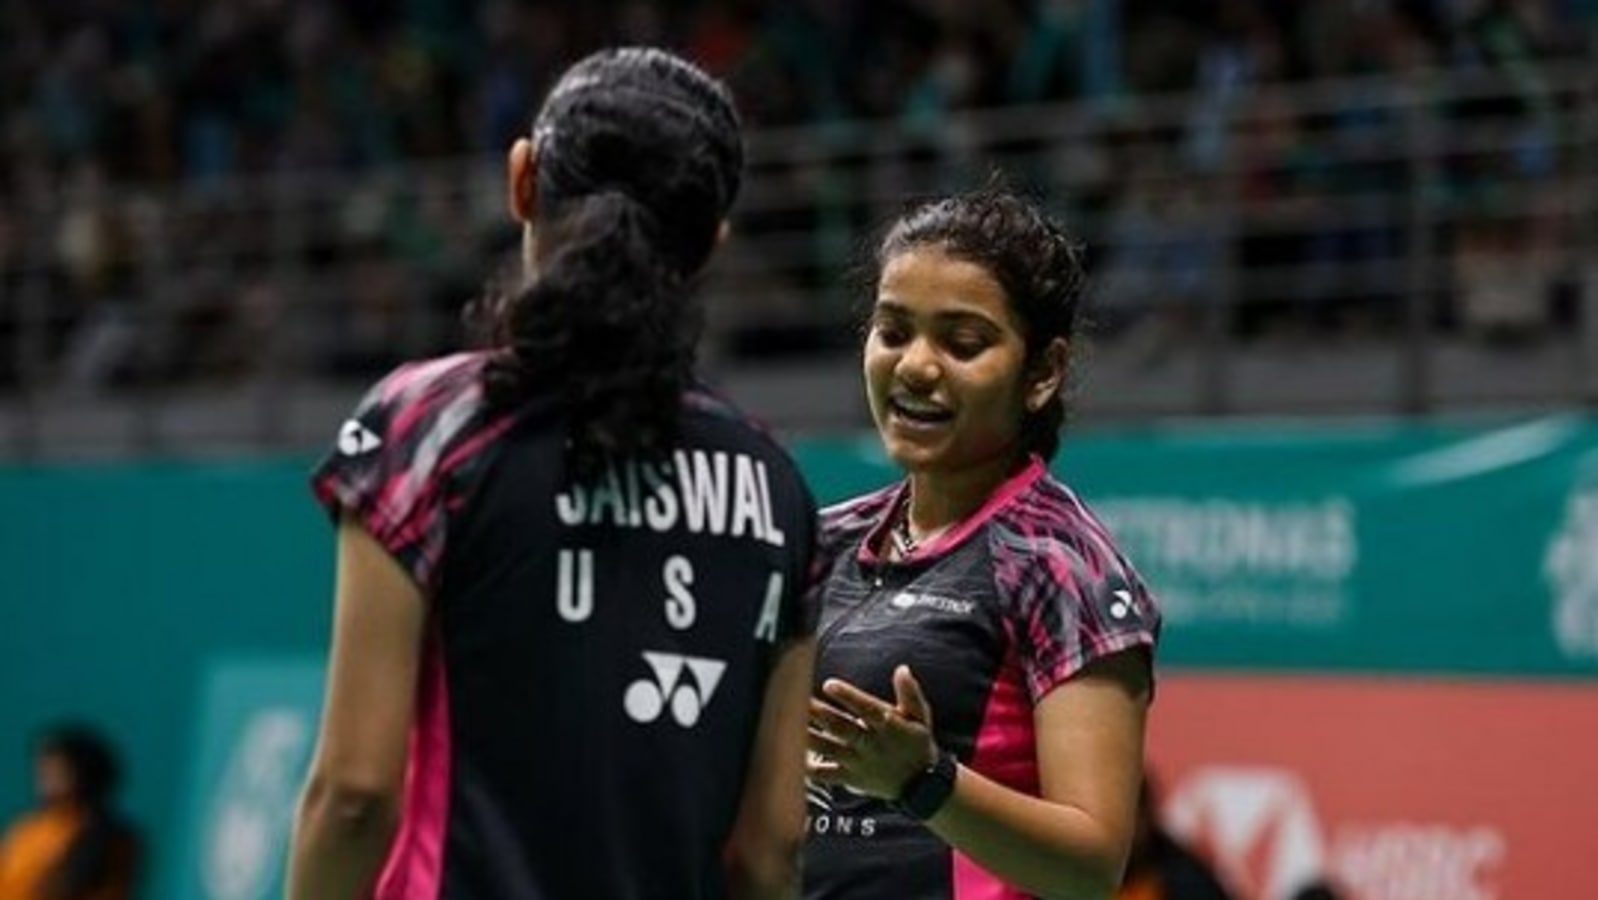 From Boston to Hyderabad to back in the US Srivedya begins quest for Olympics